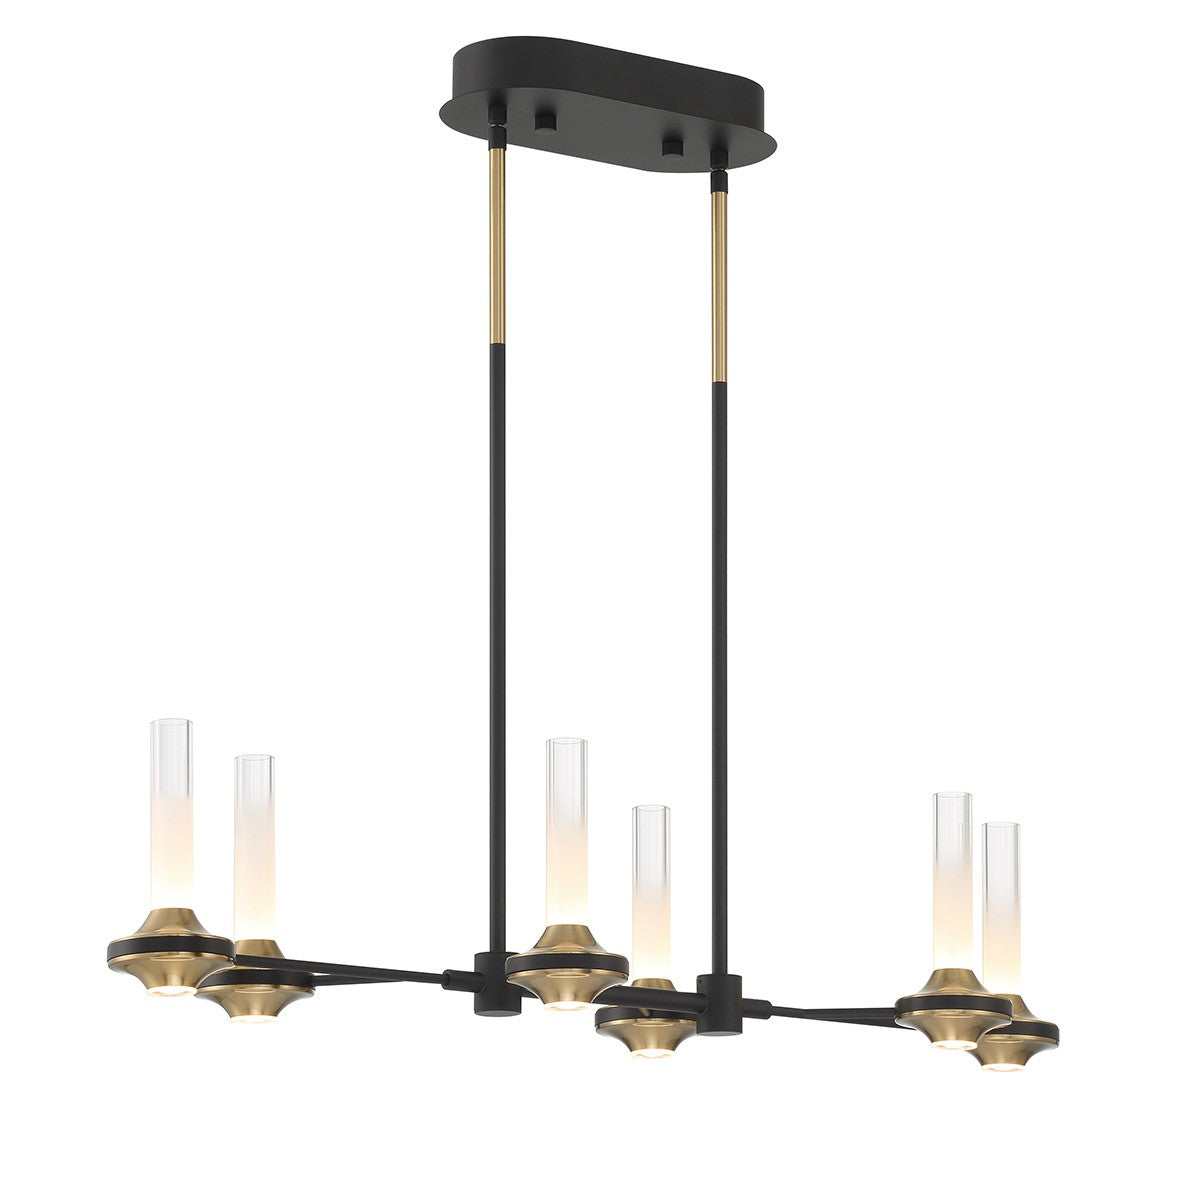 Torcia LED Linear Suspension